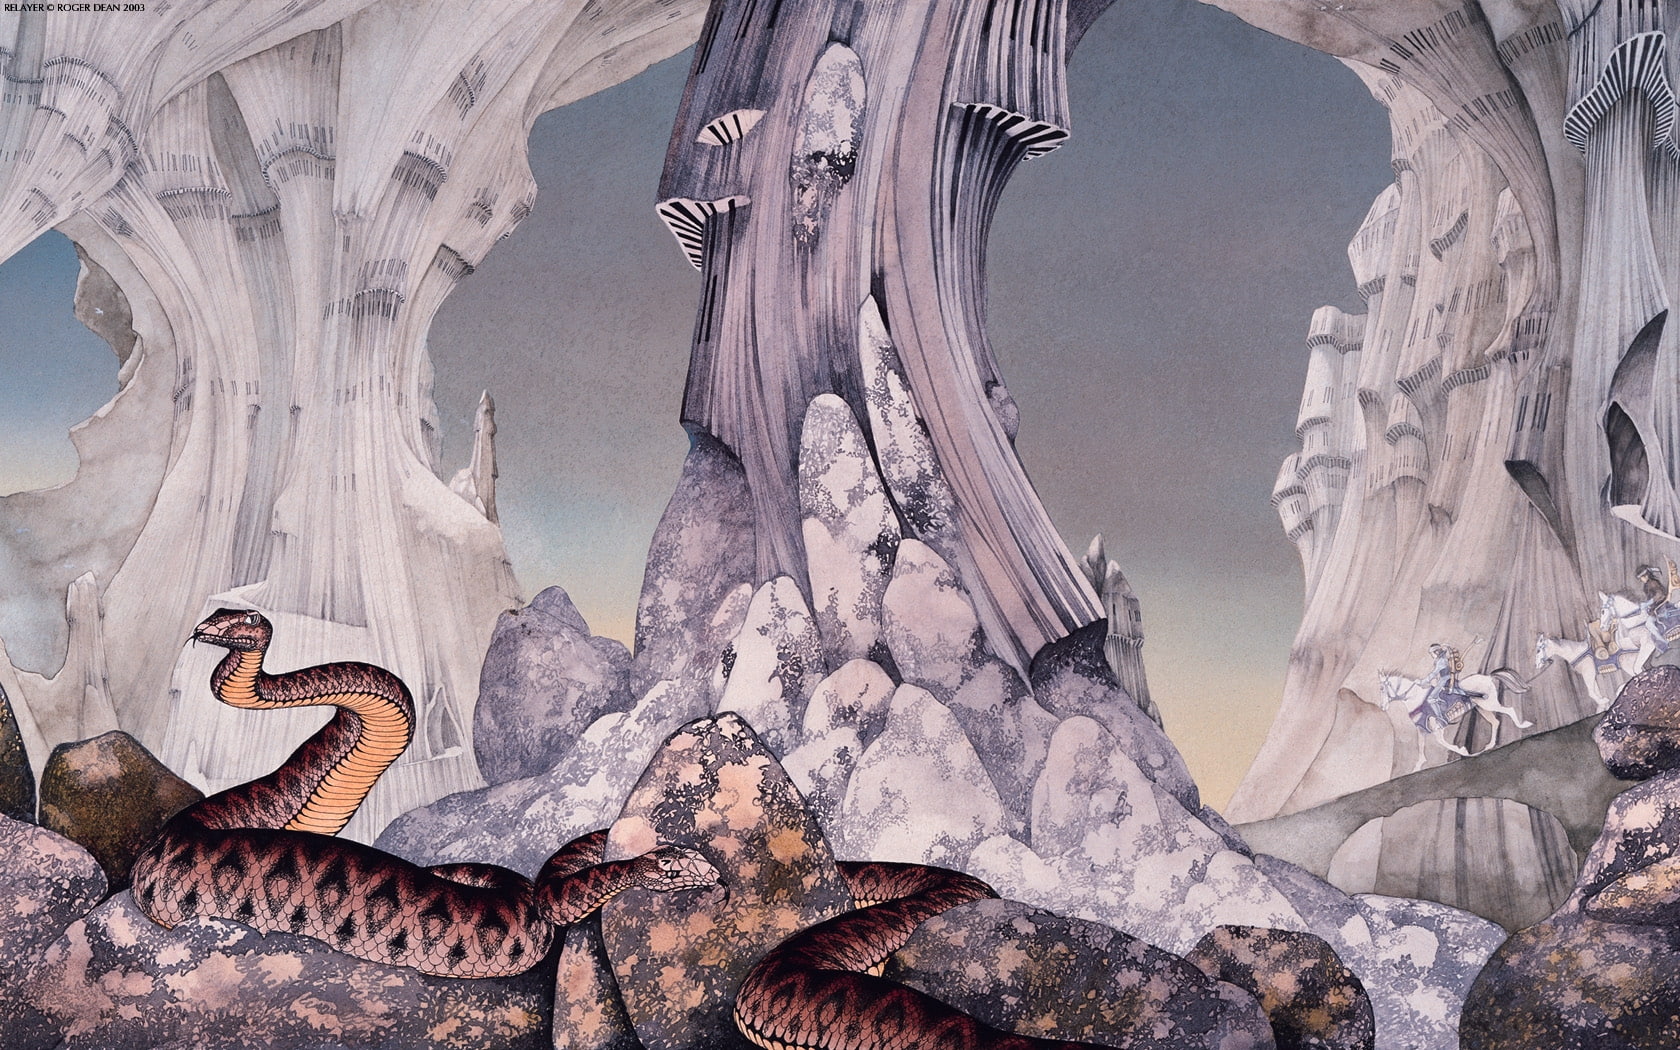 music path rocks snakes classic horses roger dean album covers riding 1974 cover art 70s yes relaye Animals Horses HD Art